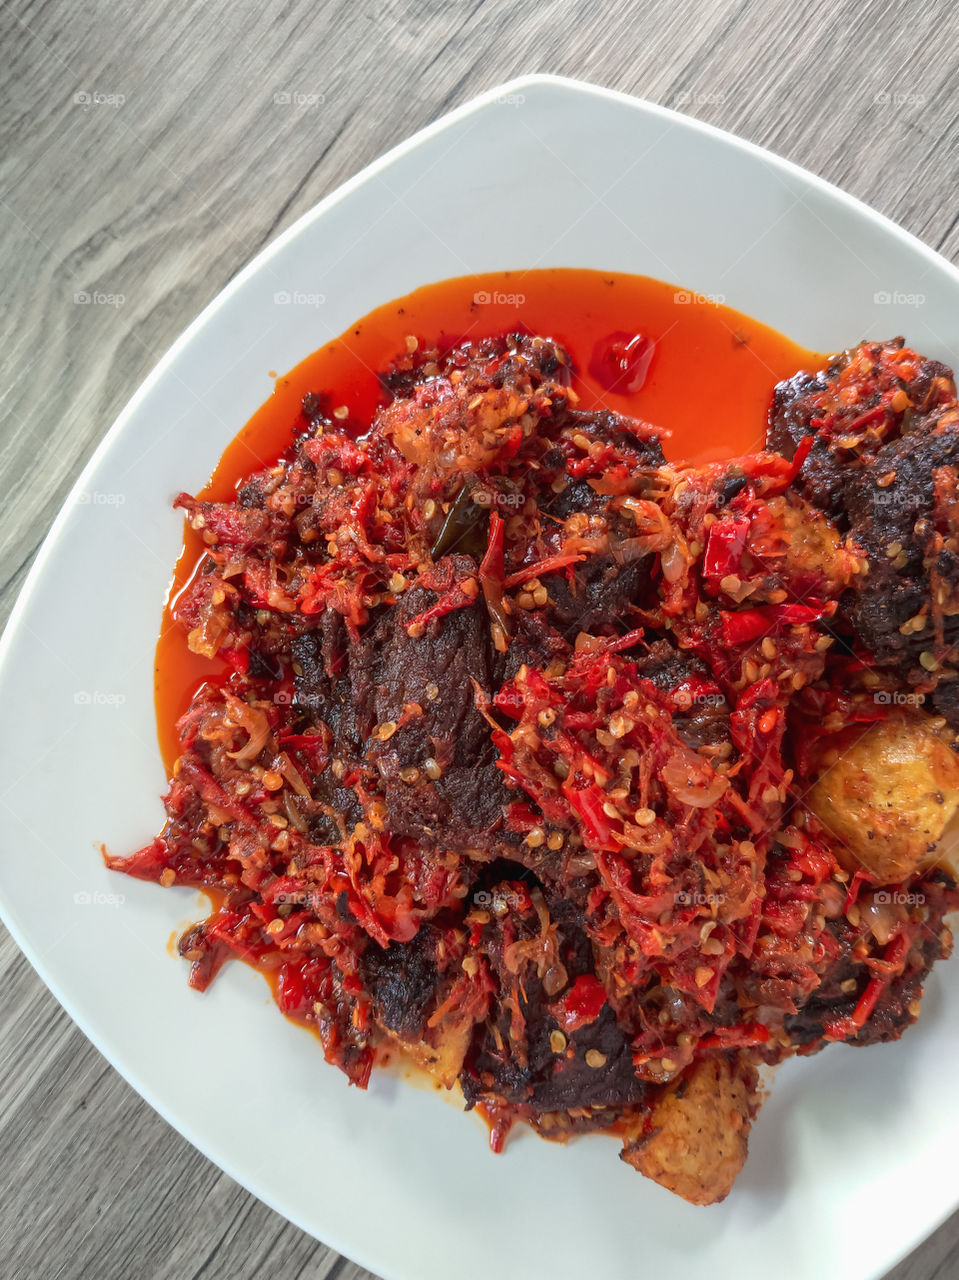 Dendeng Balado or jerky beef is a delicious food that comes from Padang  West Sumatra. Balado beef jerky is fried beef and given a spicy sauce